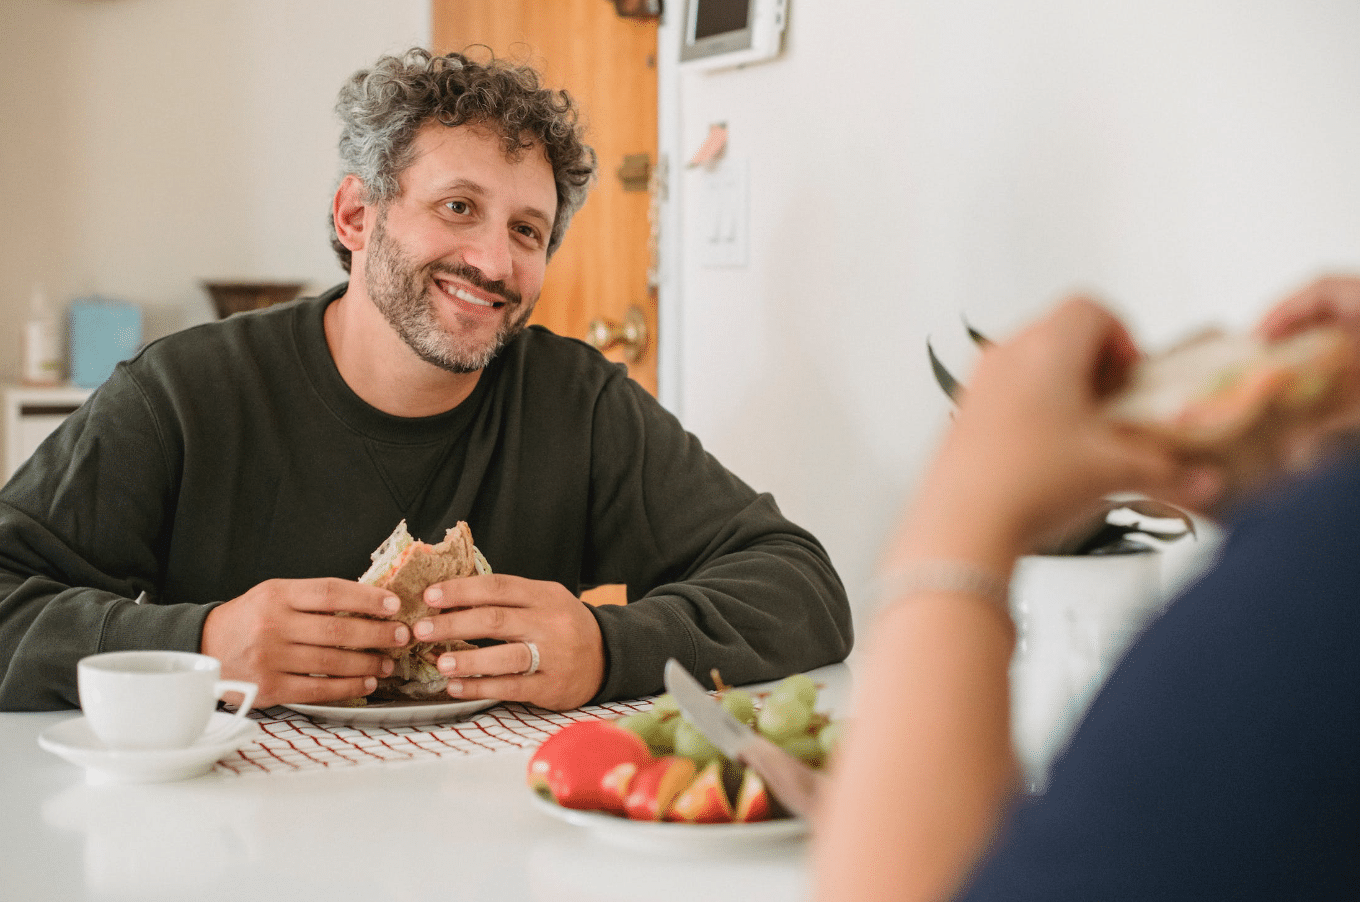 man smiling and eating his sandwich at the table